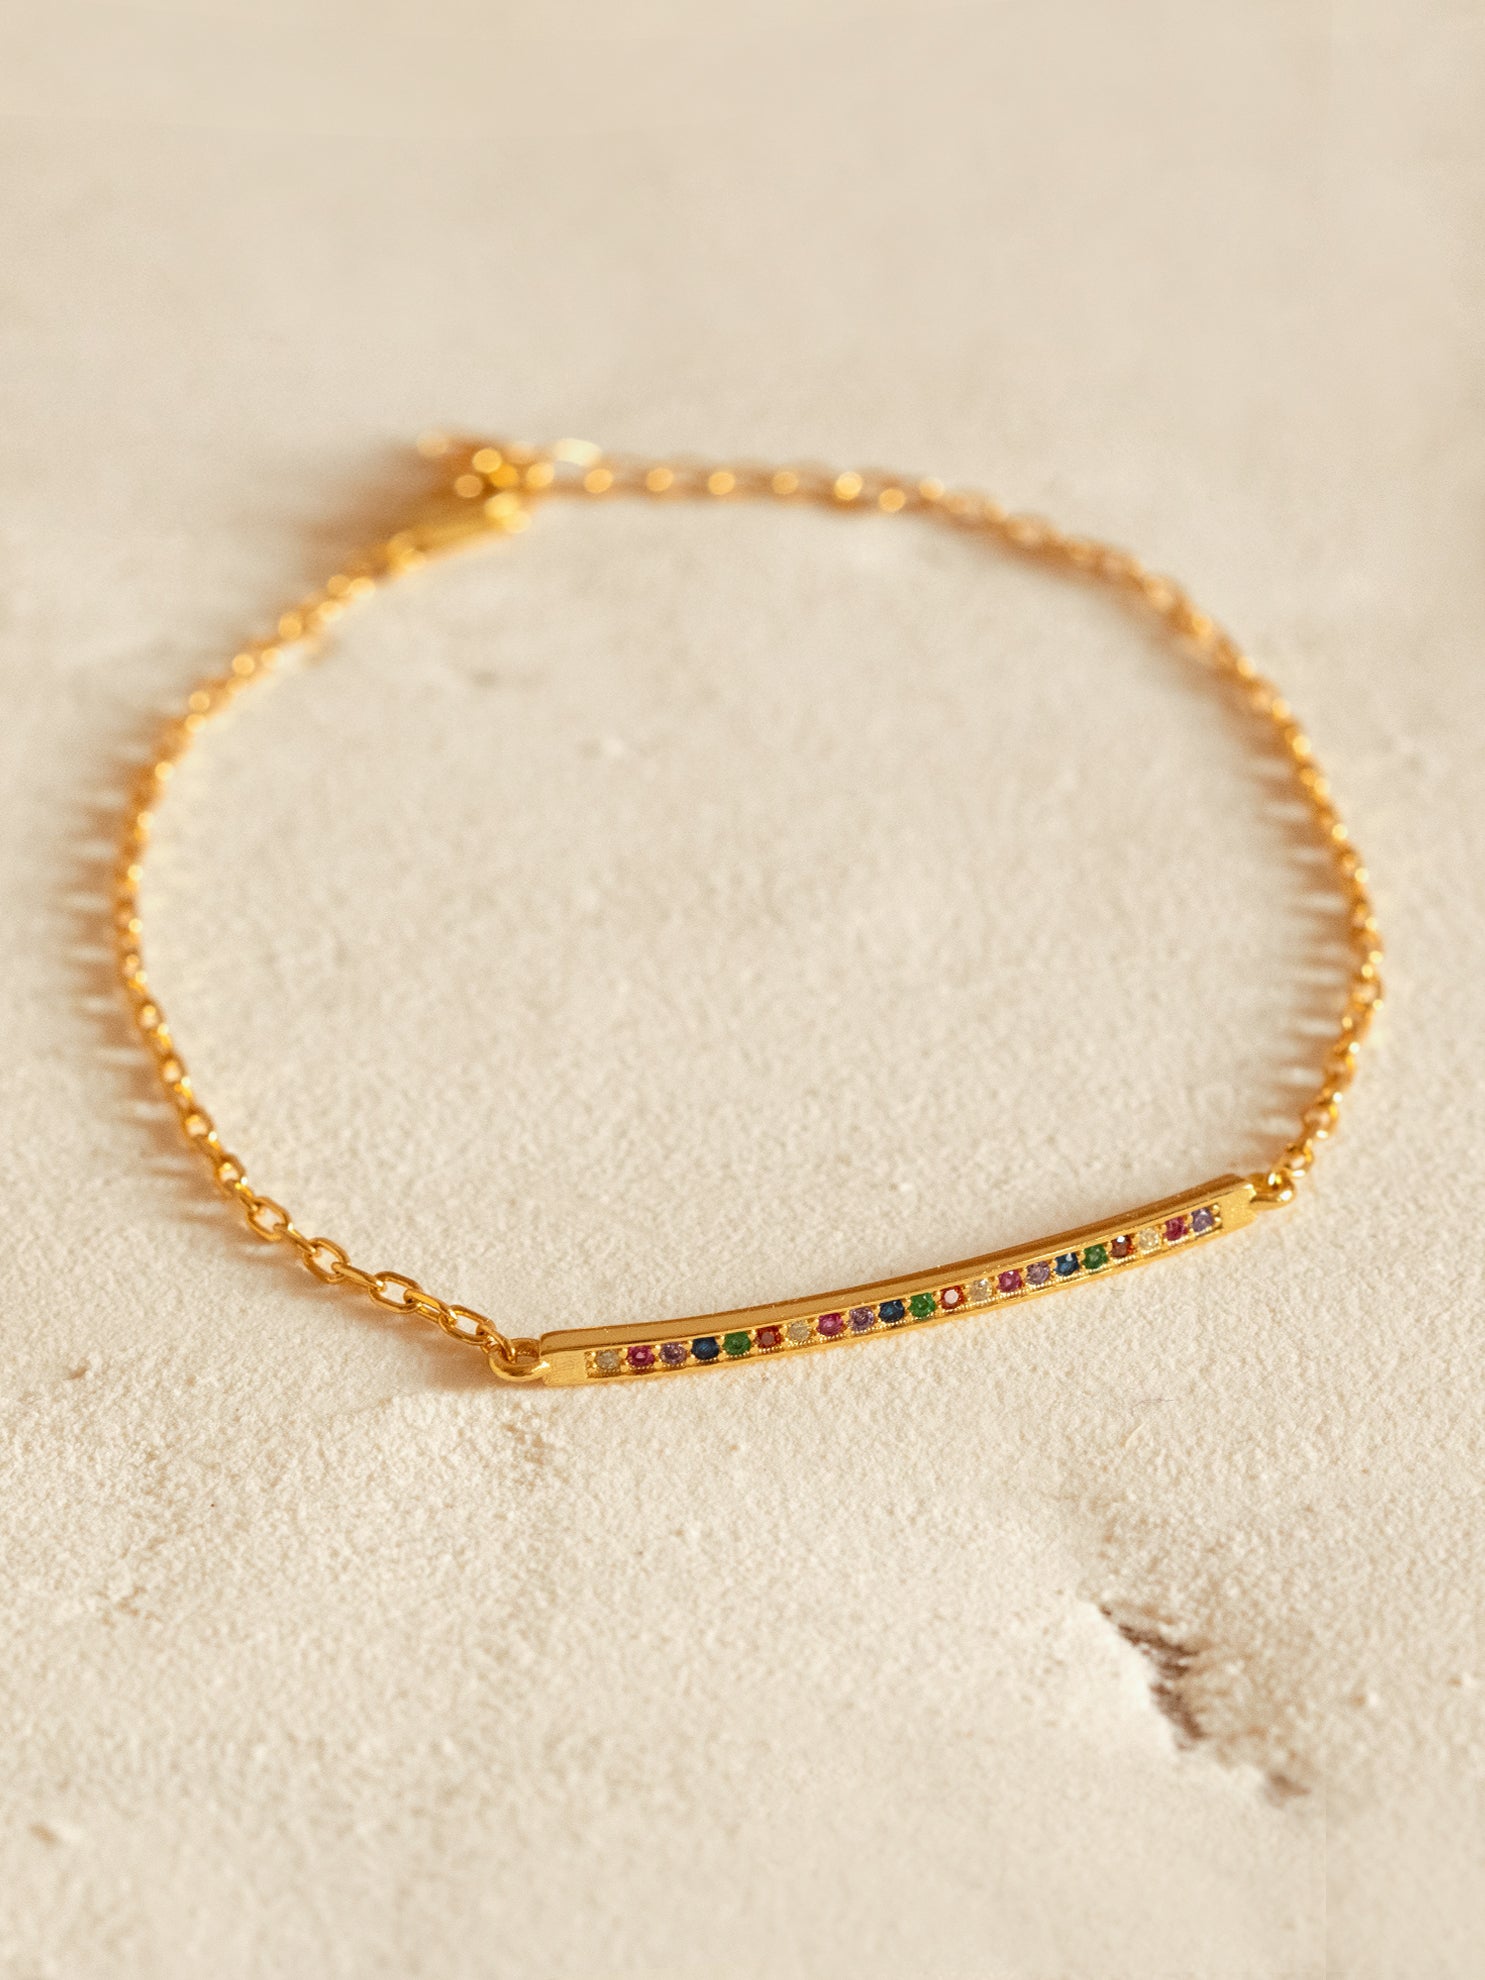 Gold Bar Bracelet With Colourful Stones